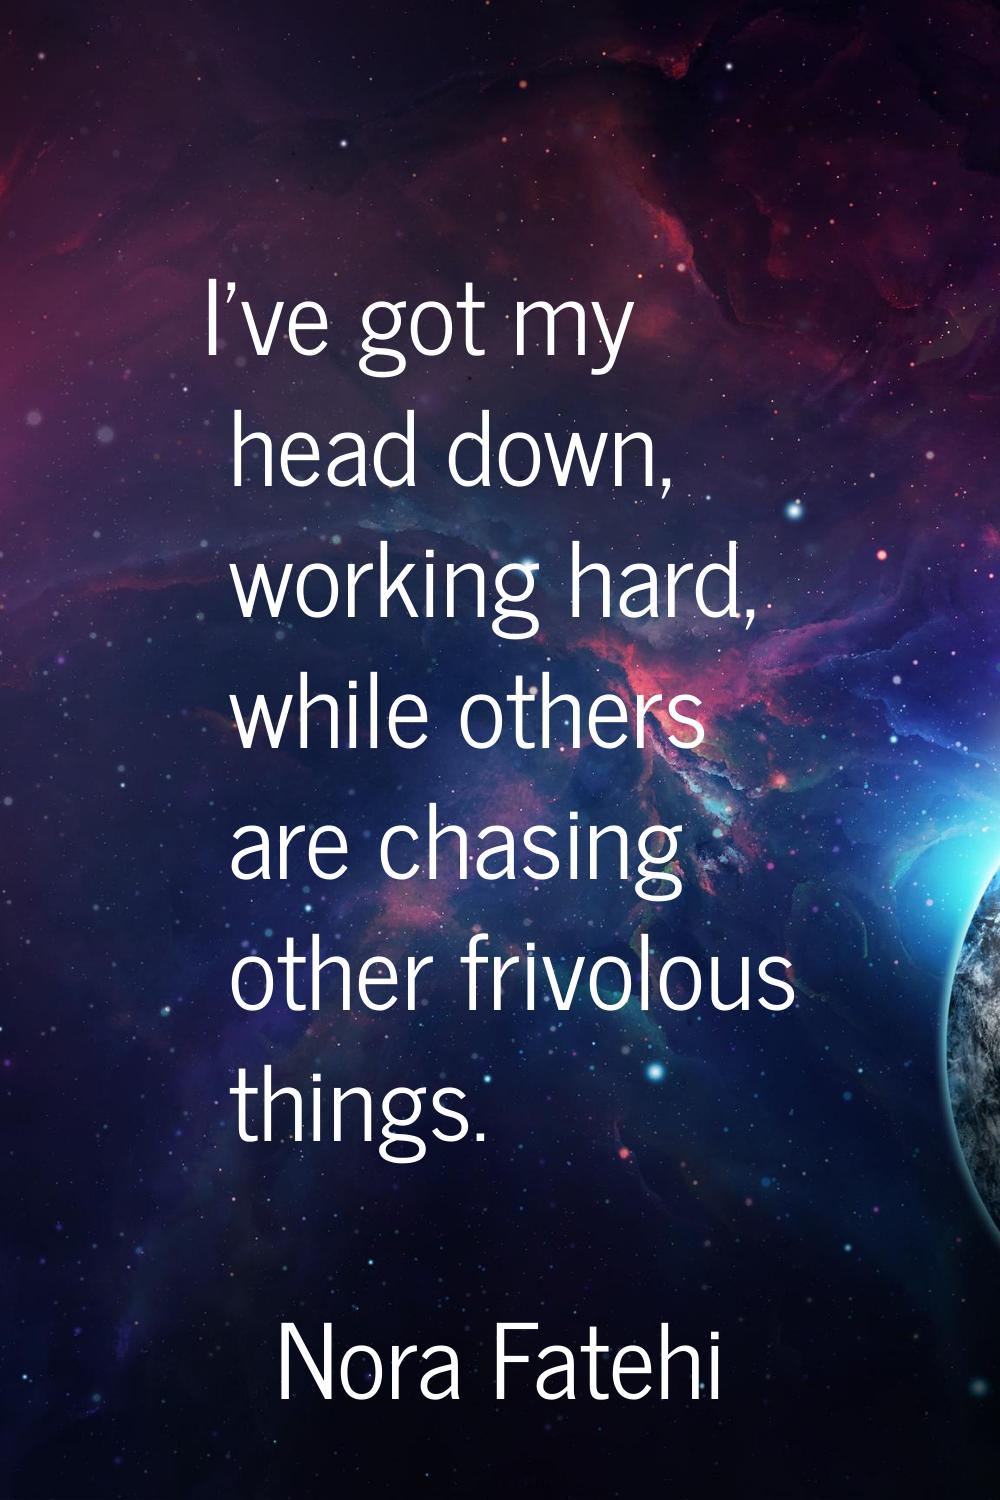 I've got my head down, working hard, while others are chasing other frivolous things.